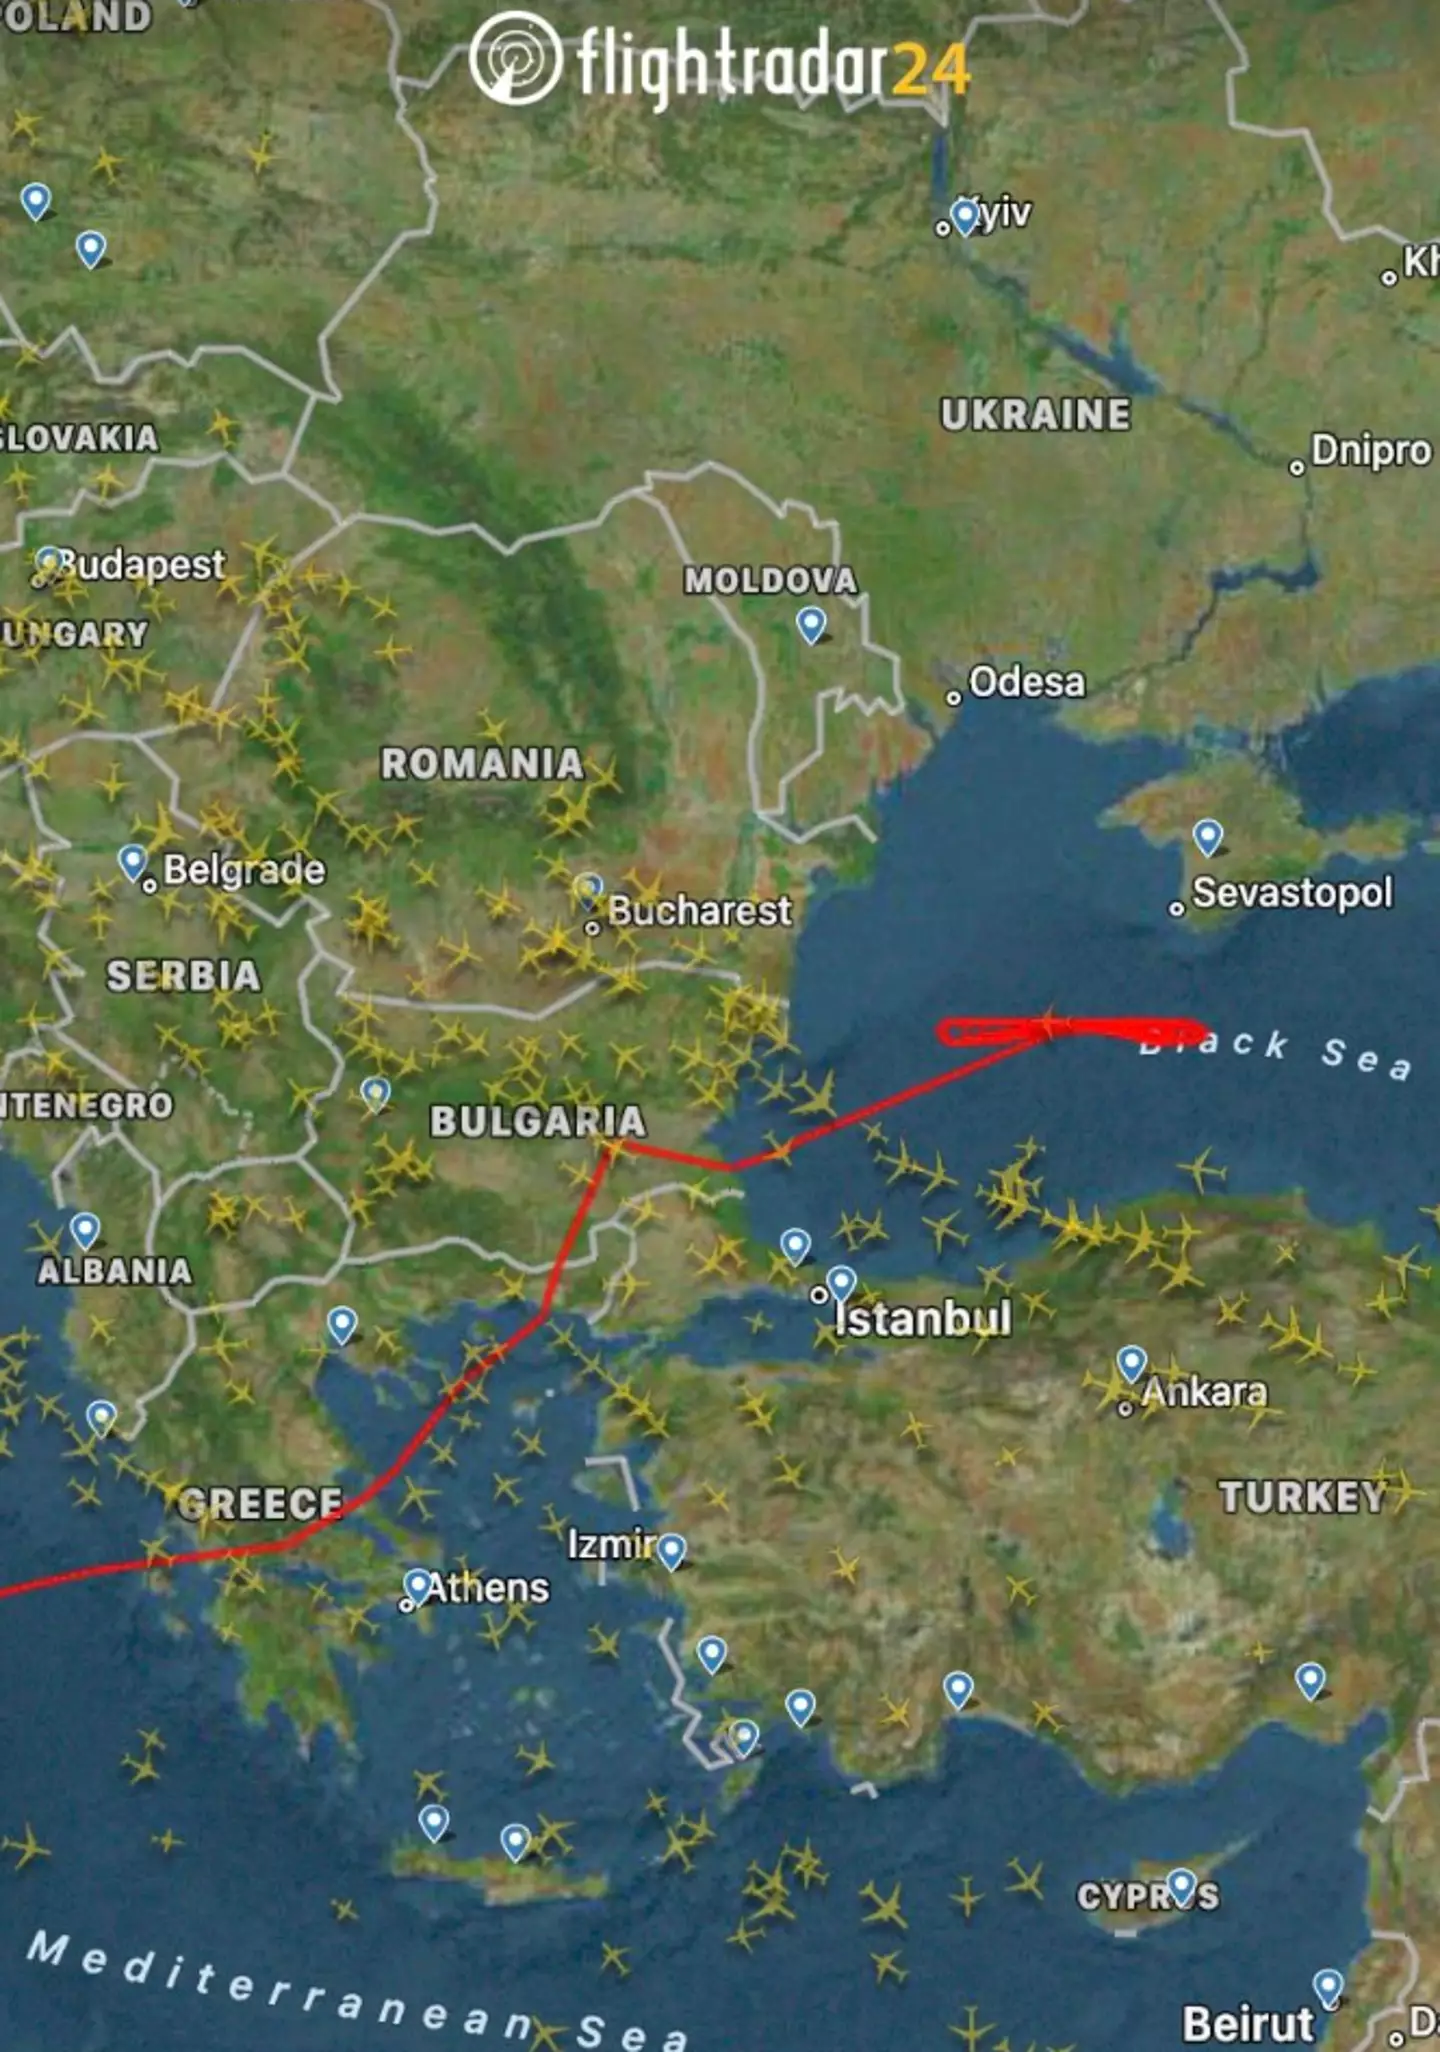 The flight path heads from Sicily over to the Black Sea.